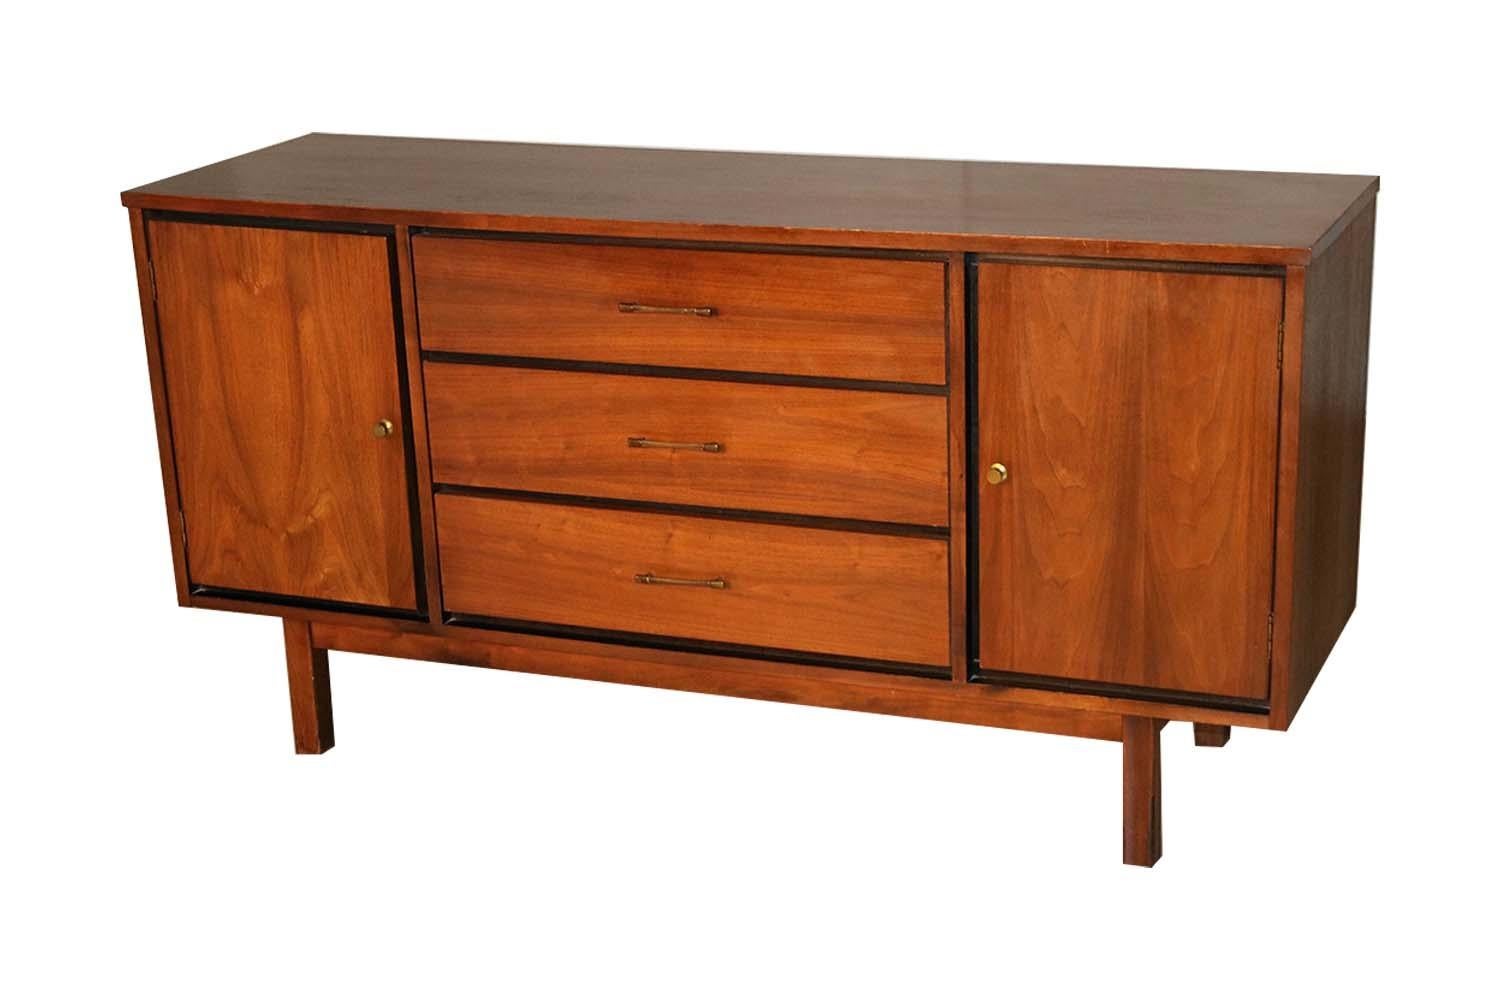 A fabulous Classic Mid-Century Modern walnut triple dresser or sideboard. Featuring a beautifully grained walnut wood case and ebonized frame housing three center drawers, each drawer is adorned with a single bow tie pull creating a striking